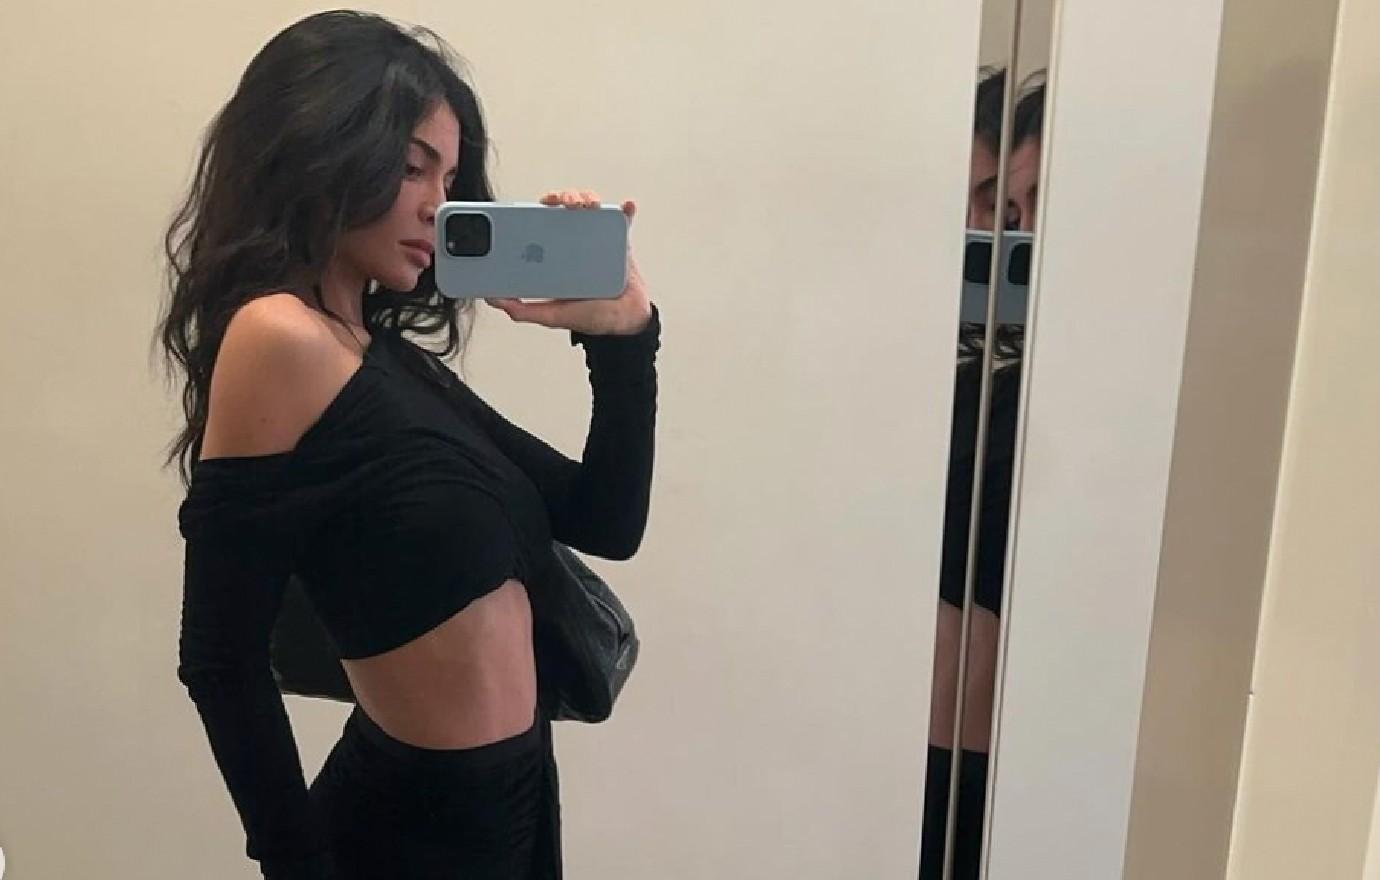 Kylie and Kendall Jenner make the odd move of crediting their retouch  expert